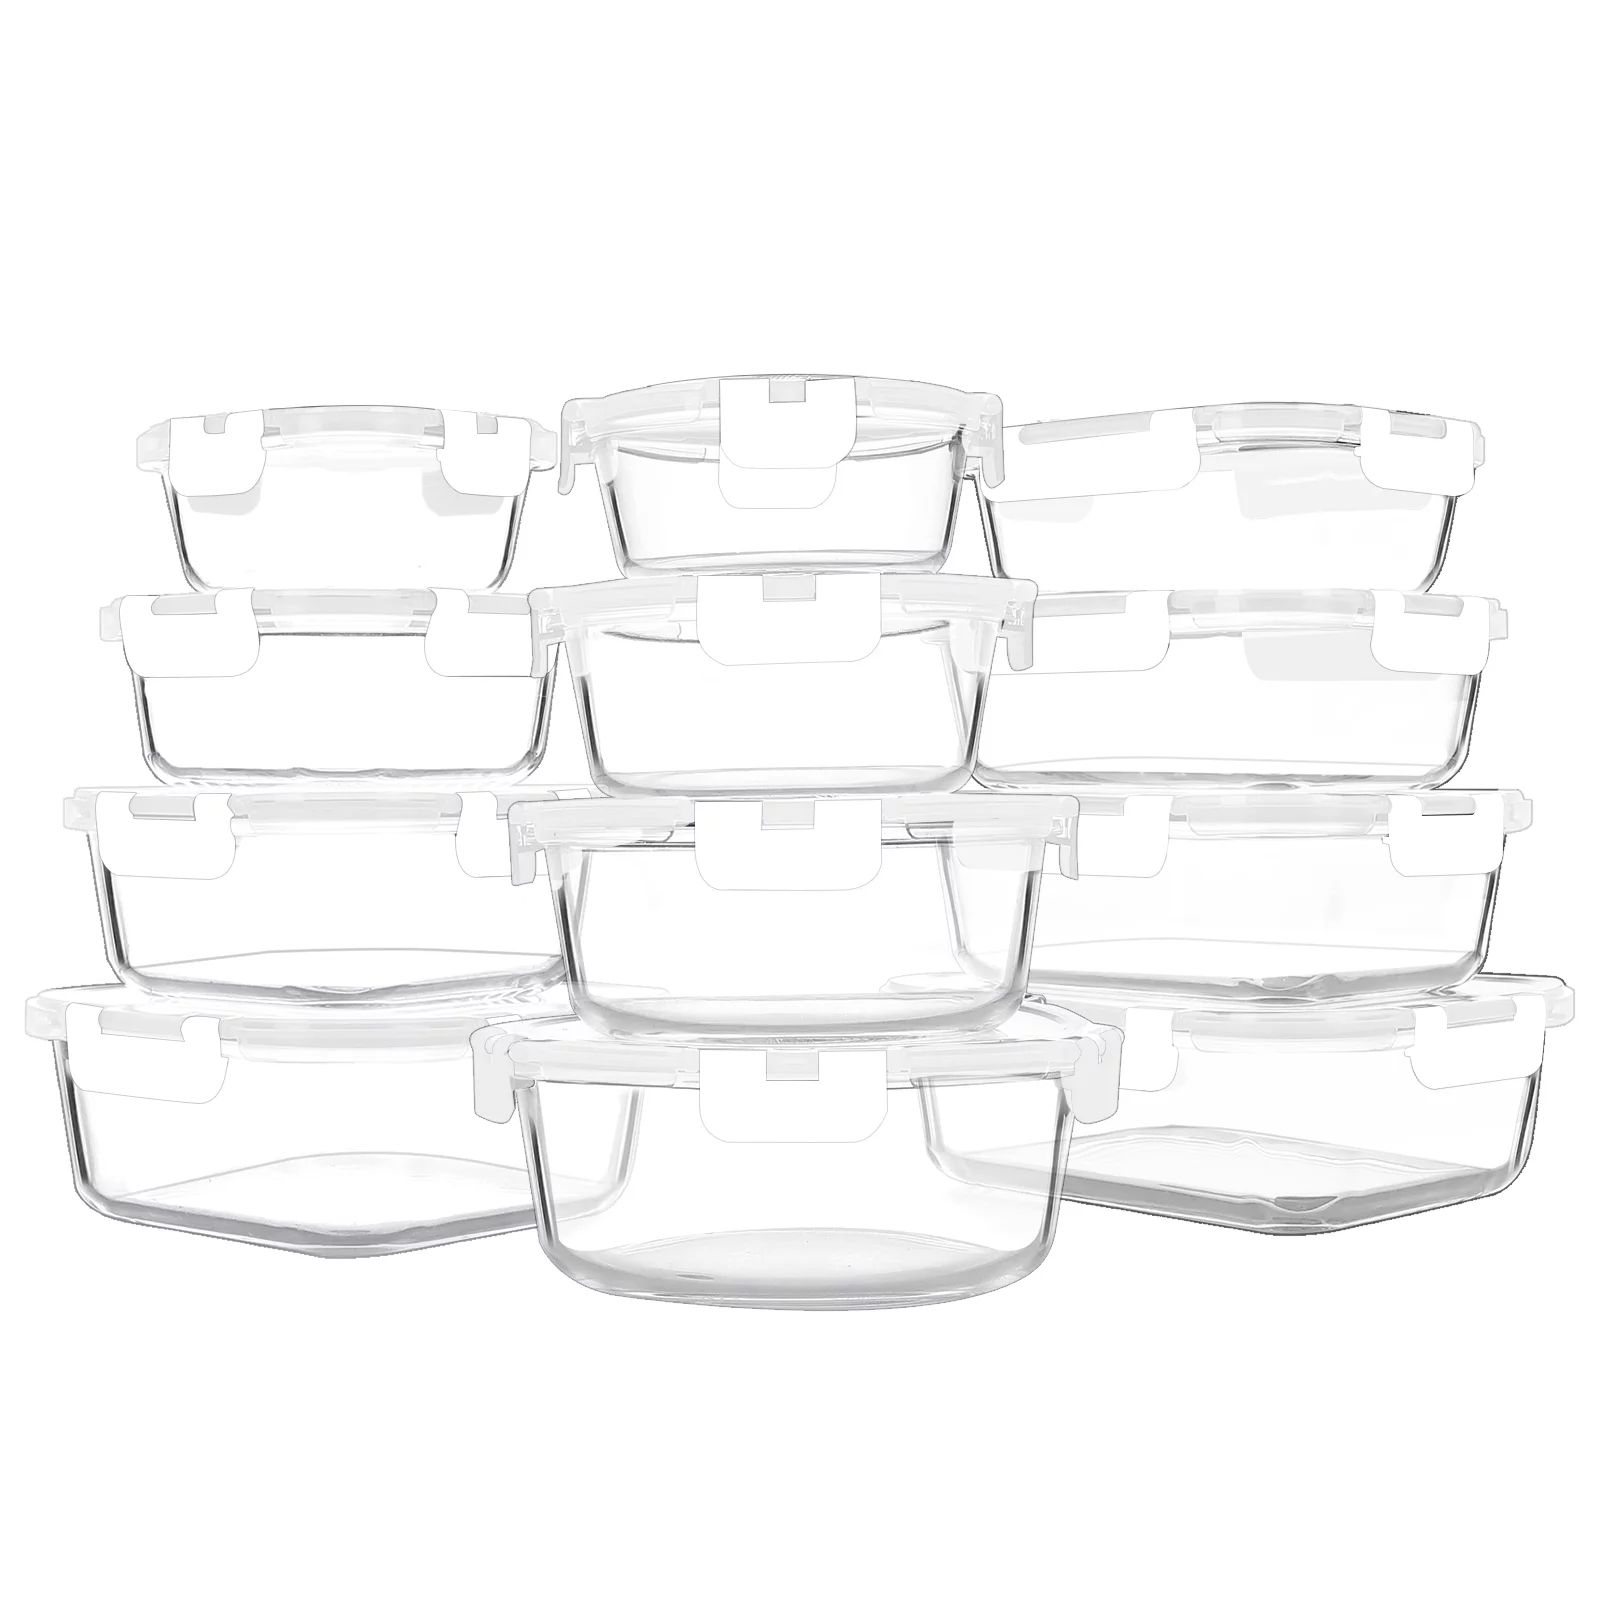 12-Pack Glass Meal Prep Containers, Glass Food Storage Containers with Locking Lids - Microwave, ... | Walmart (US)